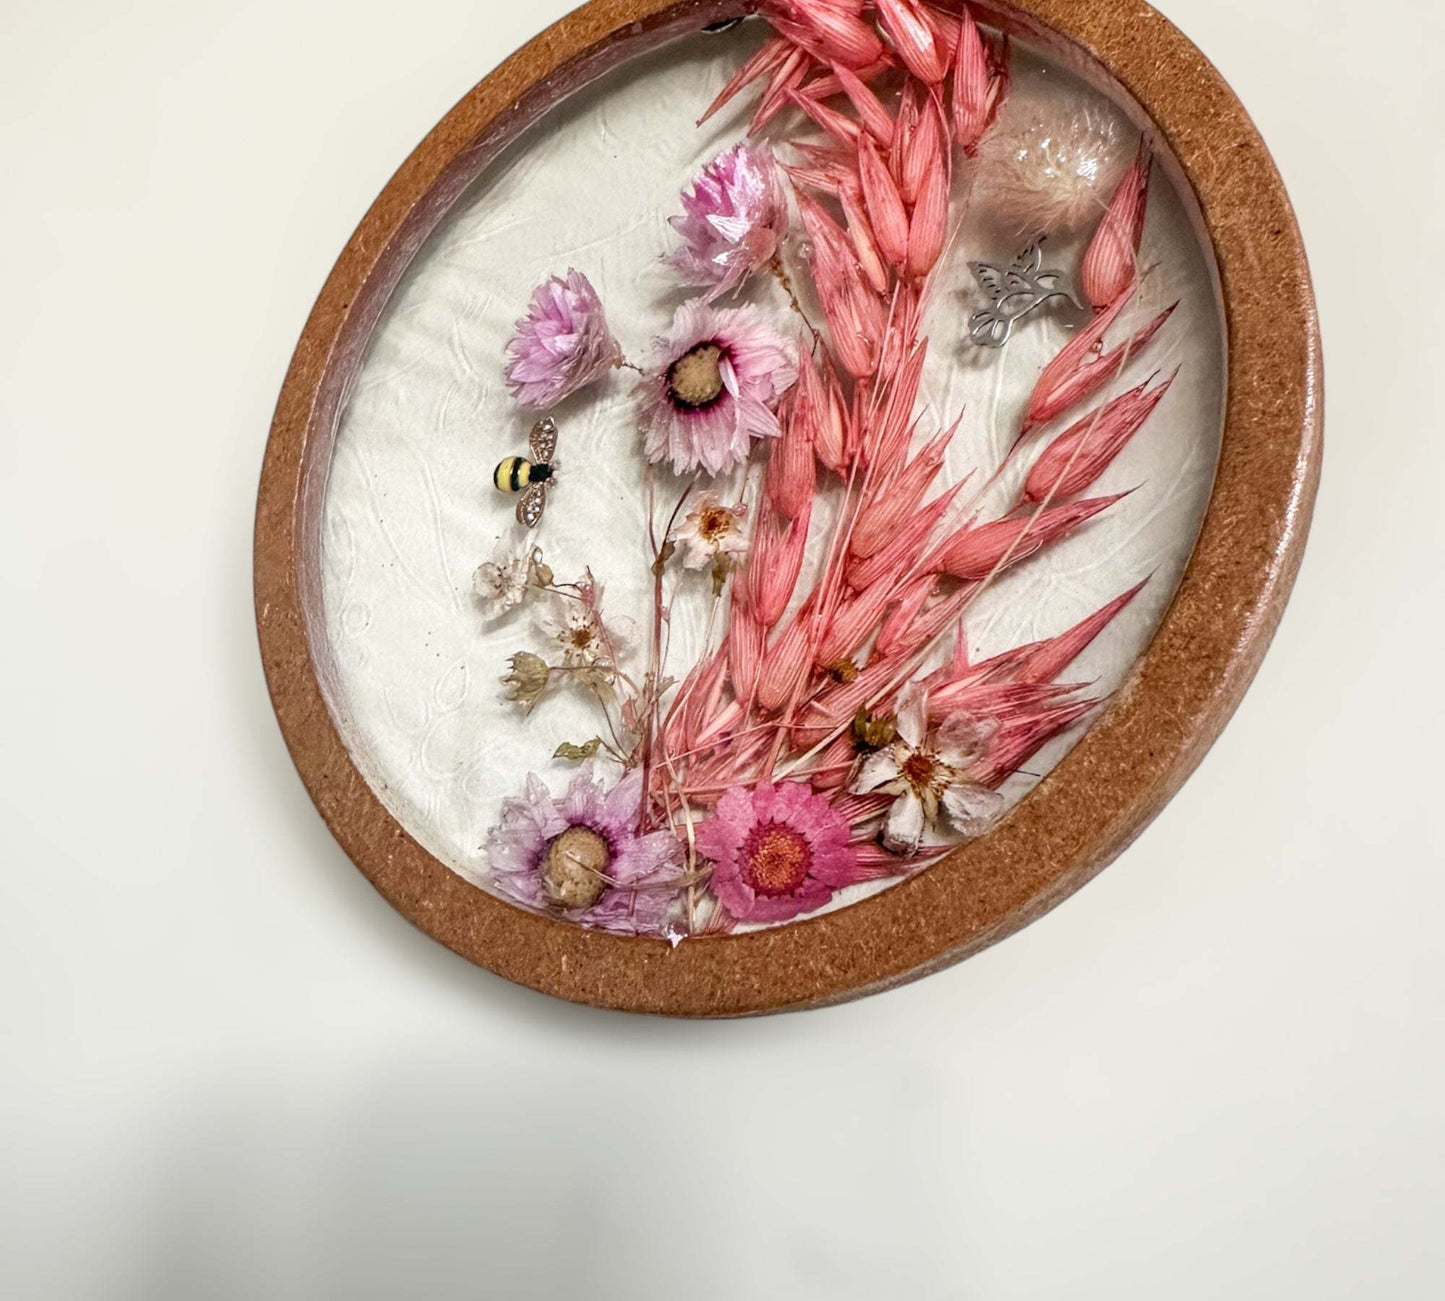 Suncatcher Wall Decor - Pretty in Pink Pressed Floral Rustic Charm